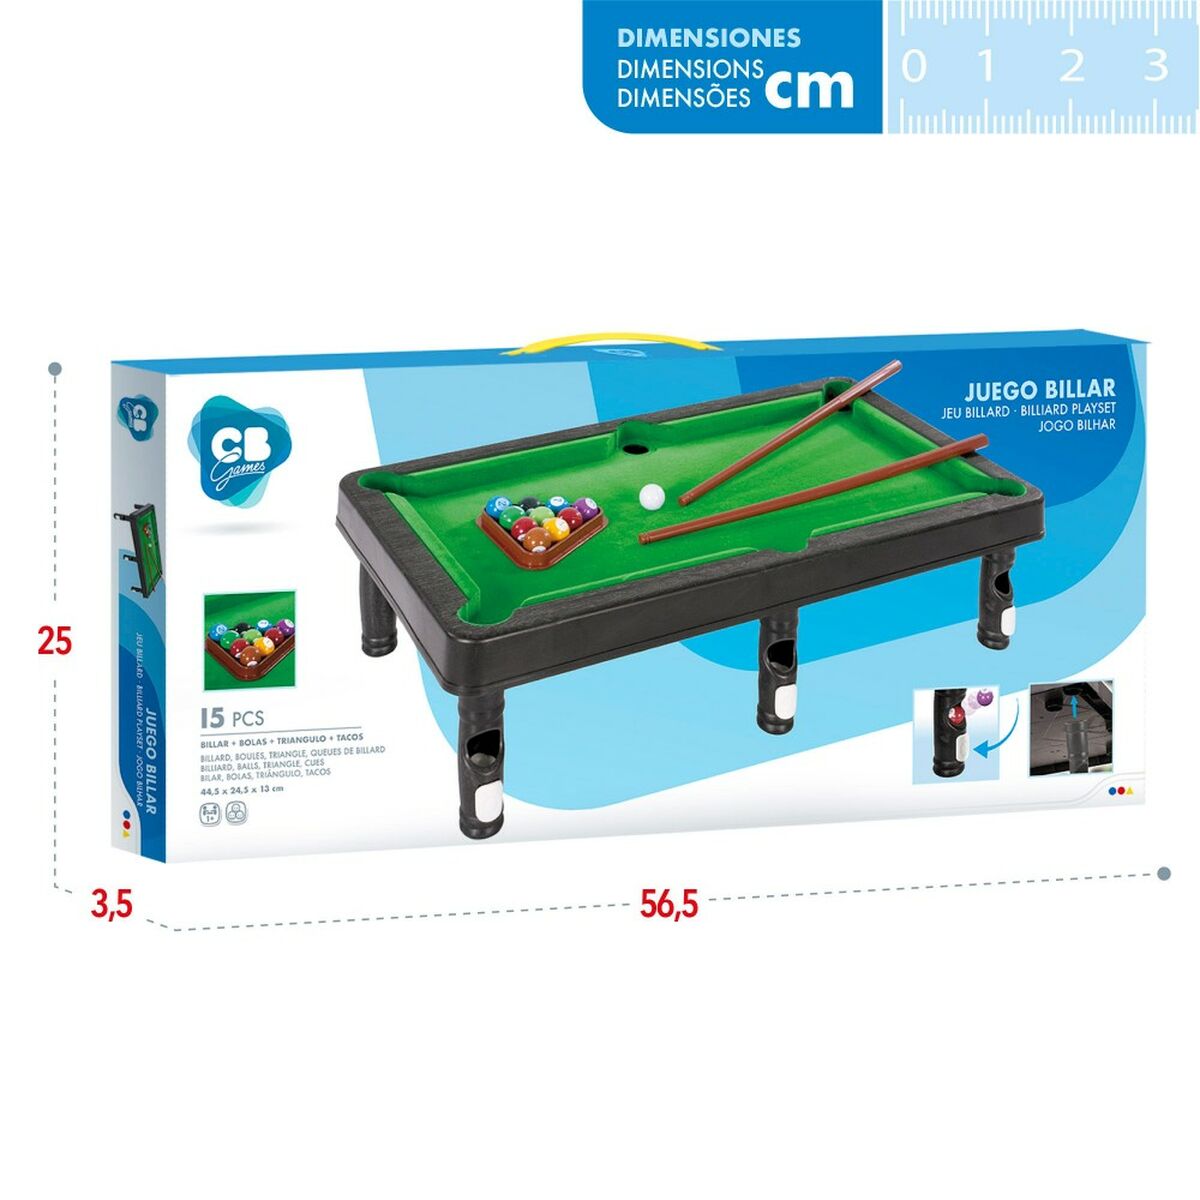 Pool table Colorbaby 44,5 x 13 x 24,5 cm